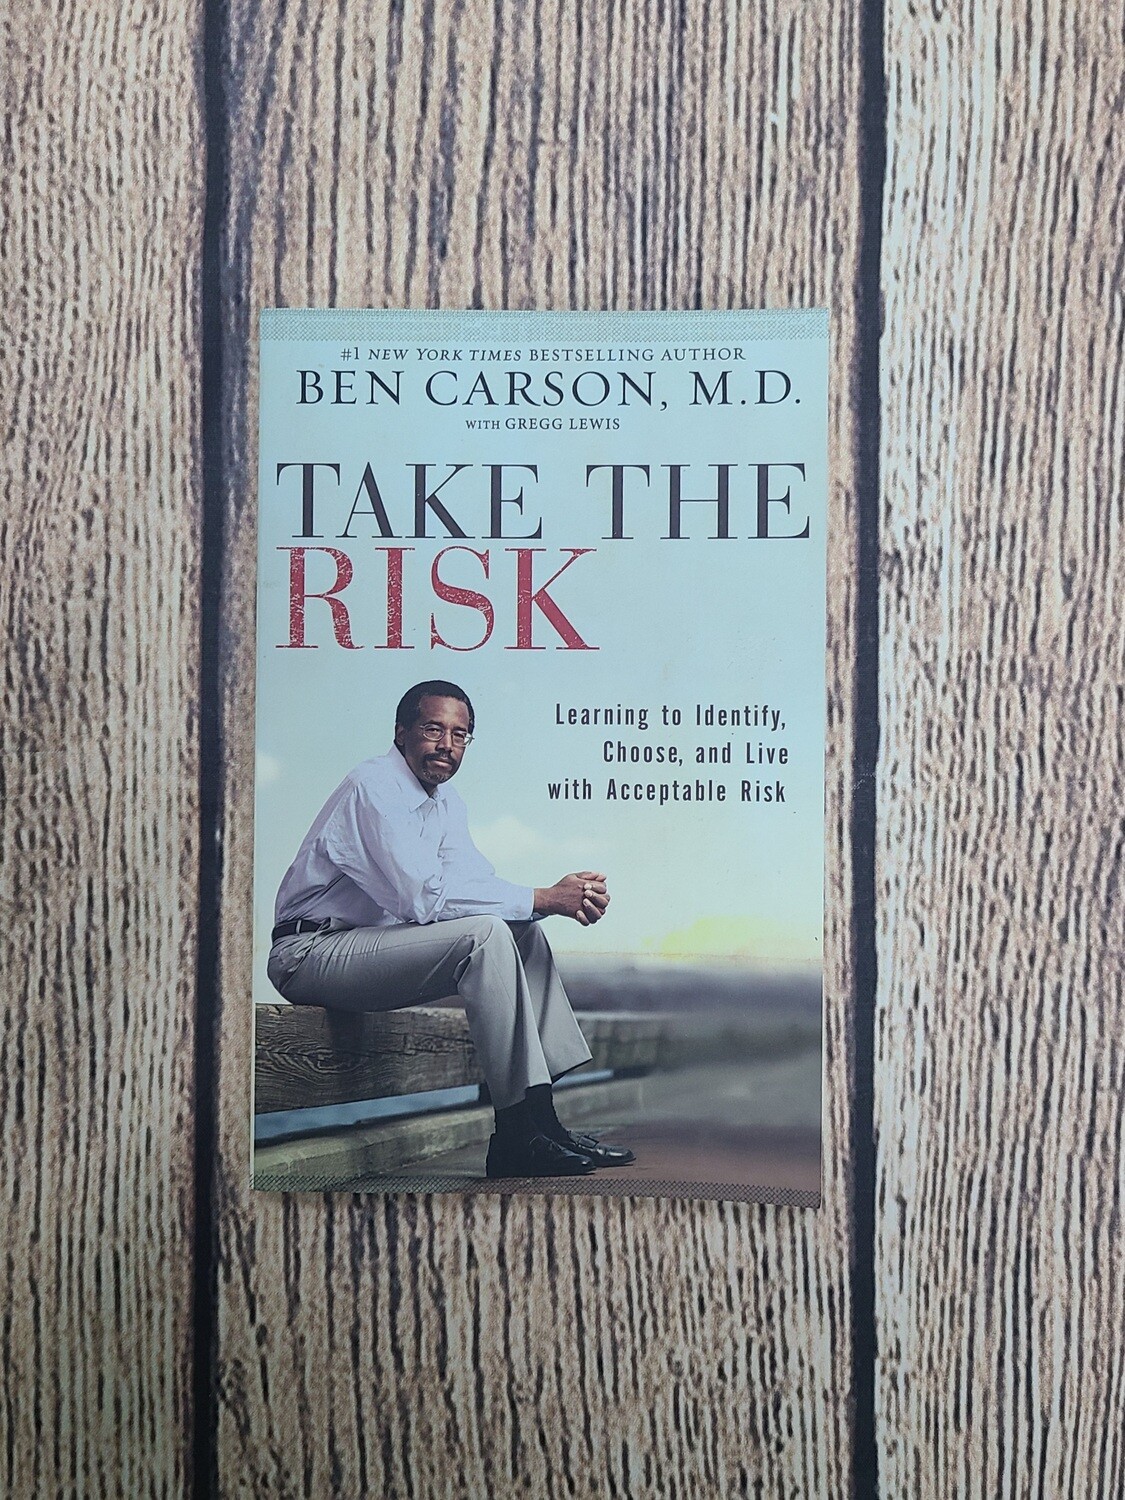 Take the Risk by Ben Carson, M.D. with Gregg Lewis